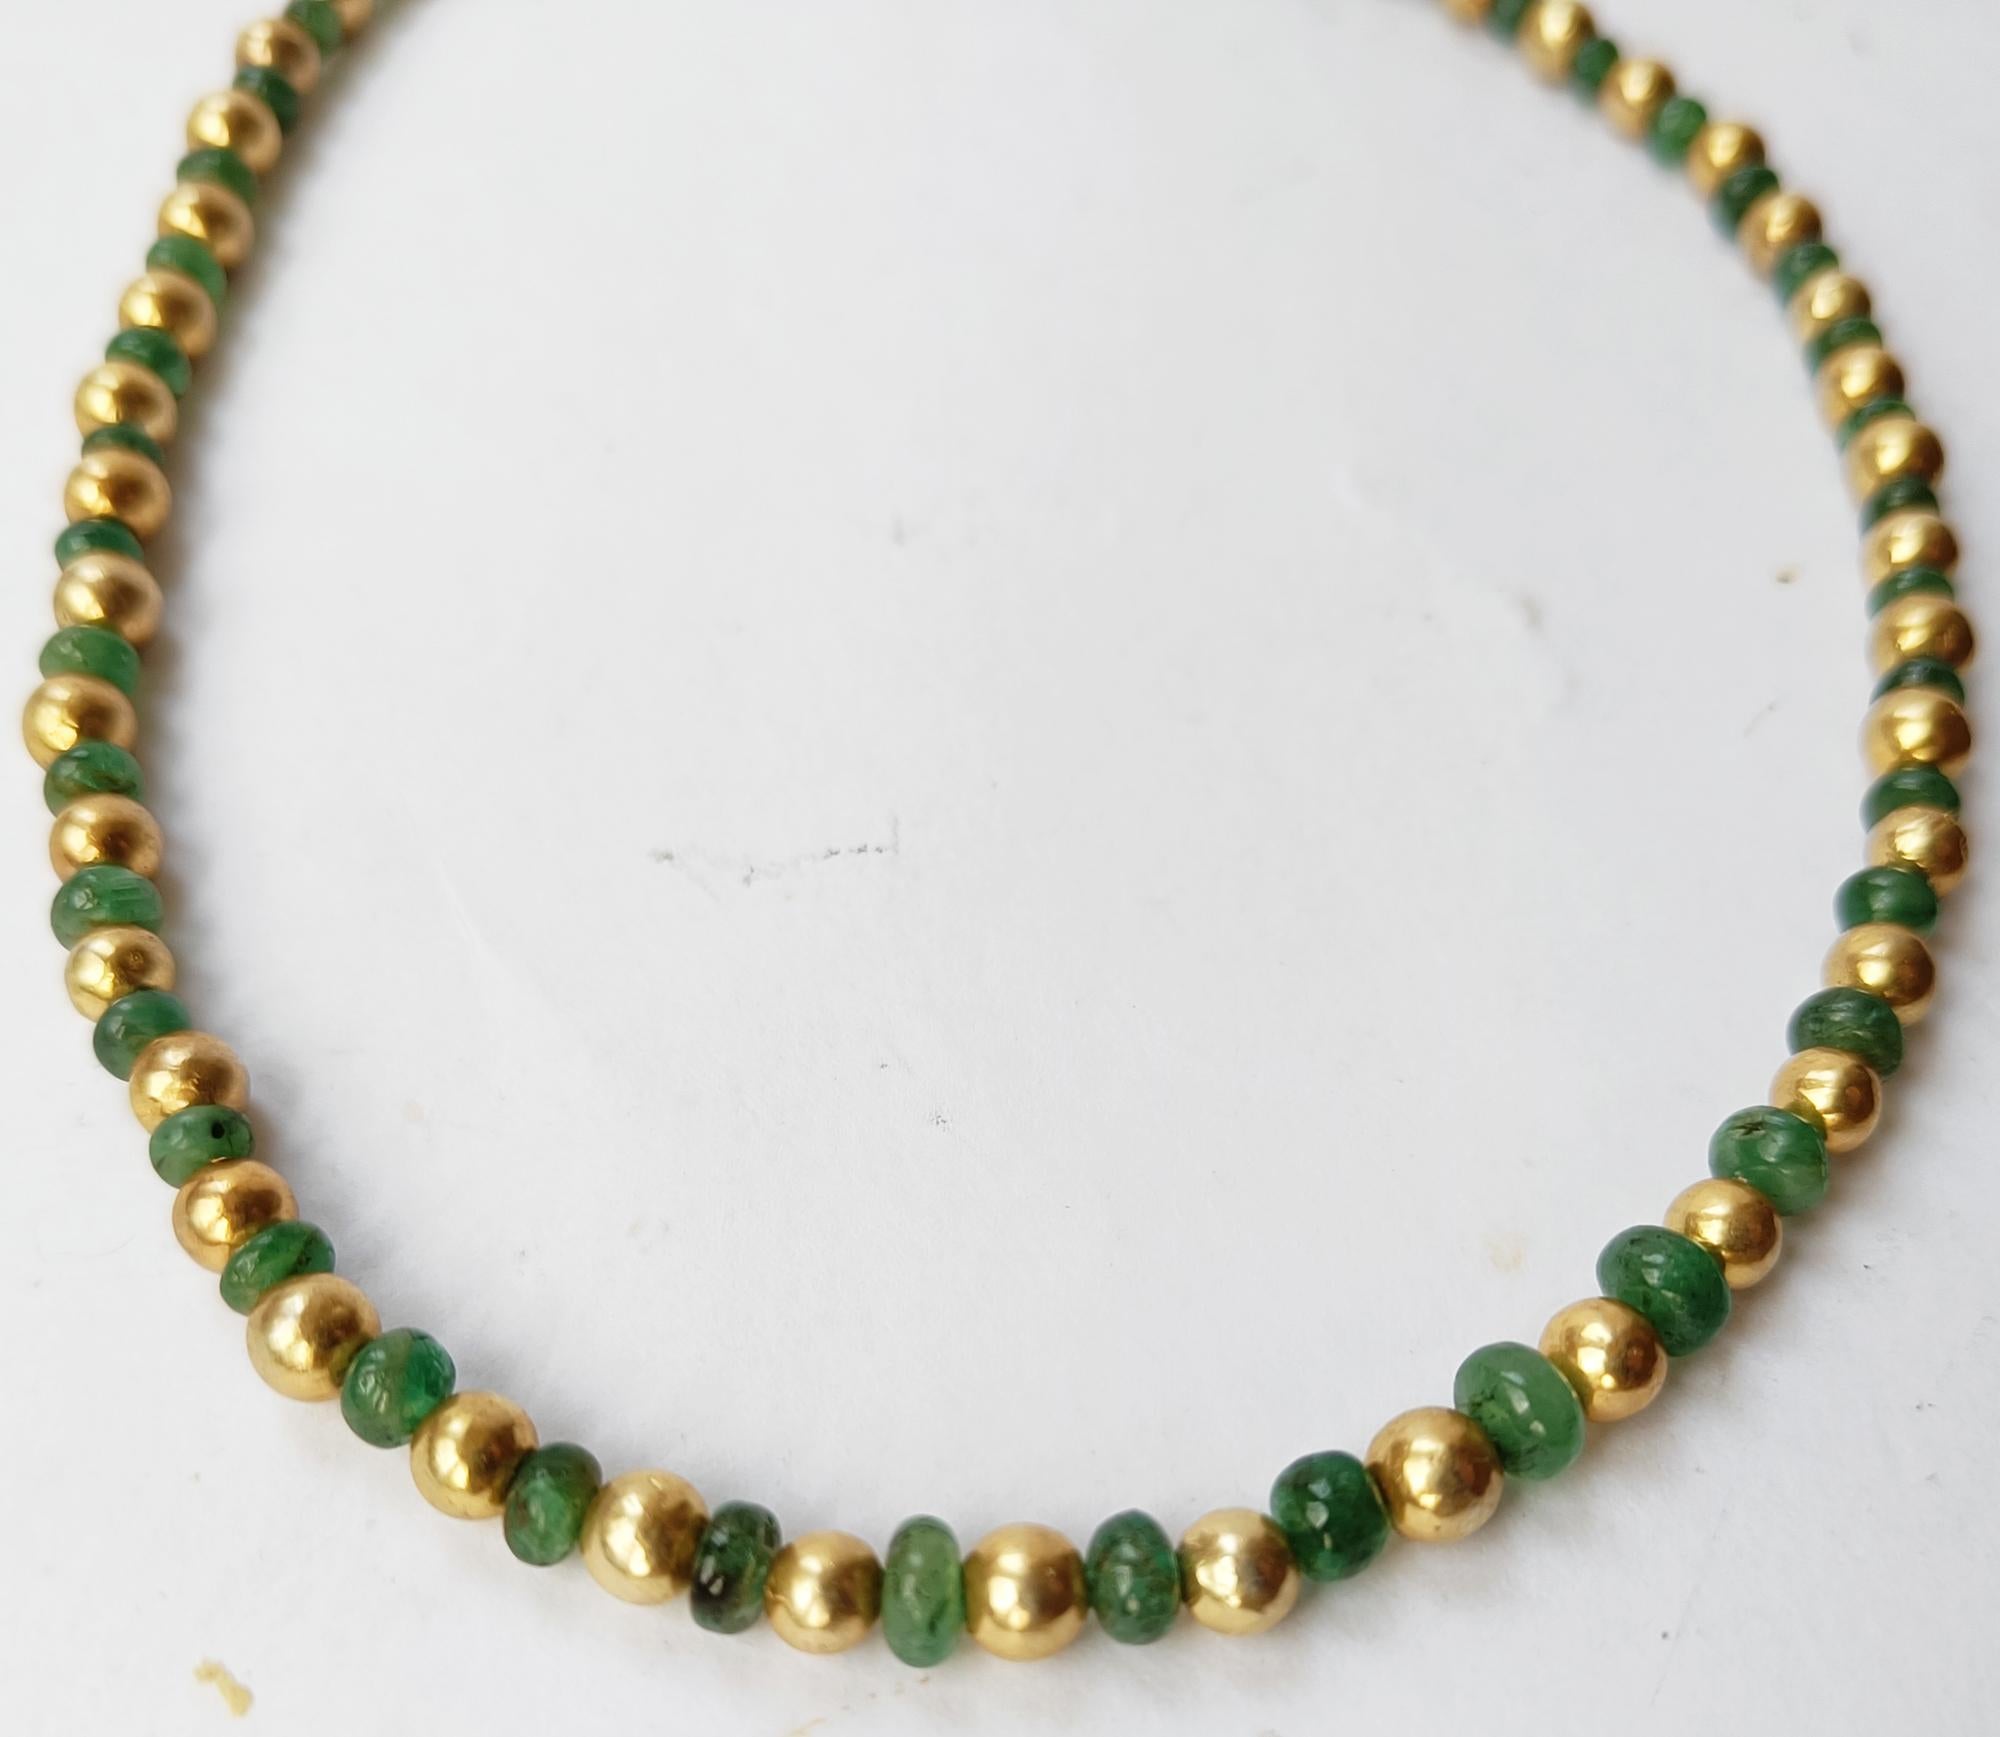 Gorgeous Emerald and gold plated silver beaded necklace
Unfaceted Zambian Emerald beads with gold plated silver beads  
4-5 mm Emerald beads
5 mm gold plated silver beads 
Necklace 16 Inch 40 cm 
All hand crafted with sterling clasp
Simple Elegant